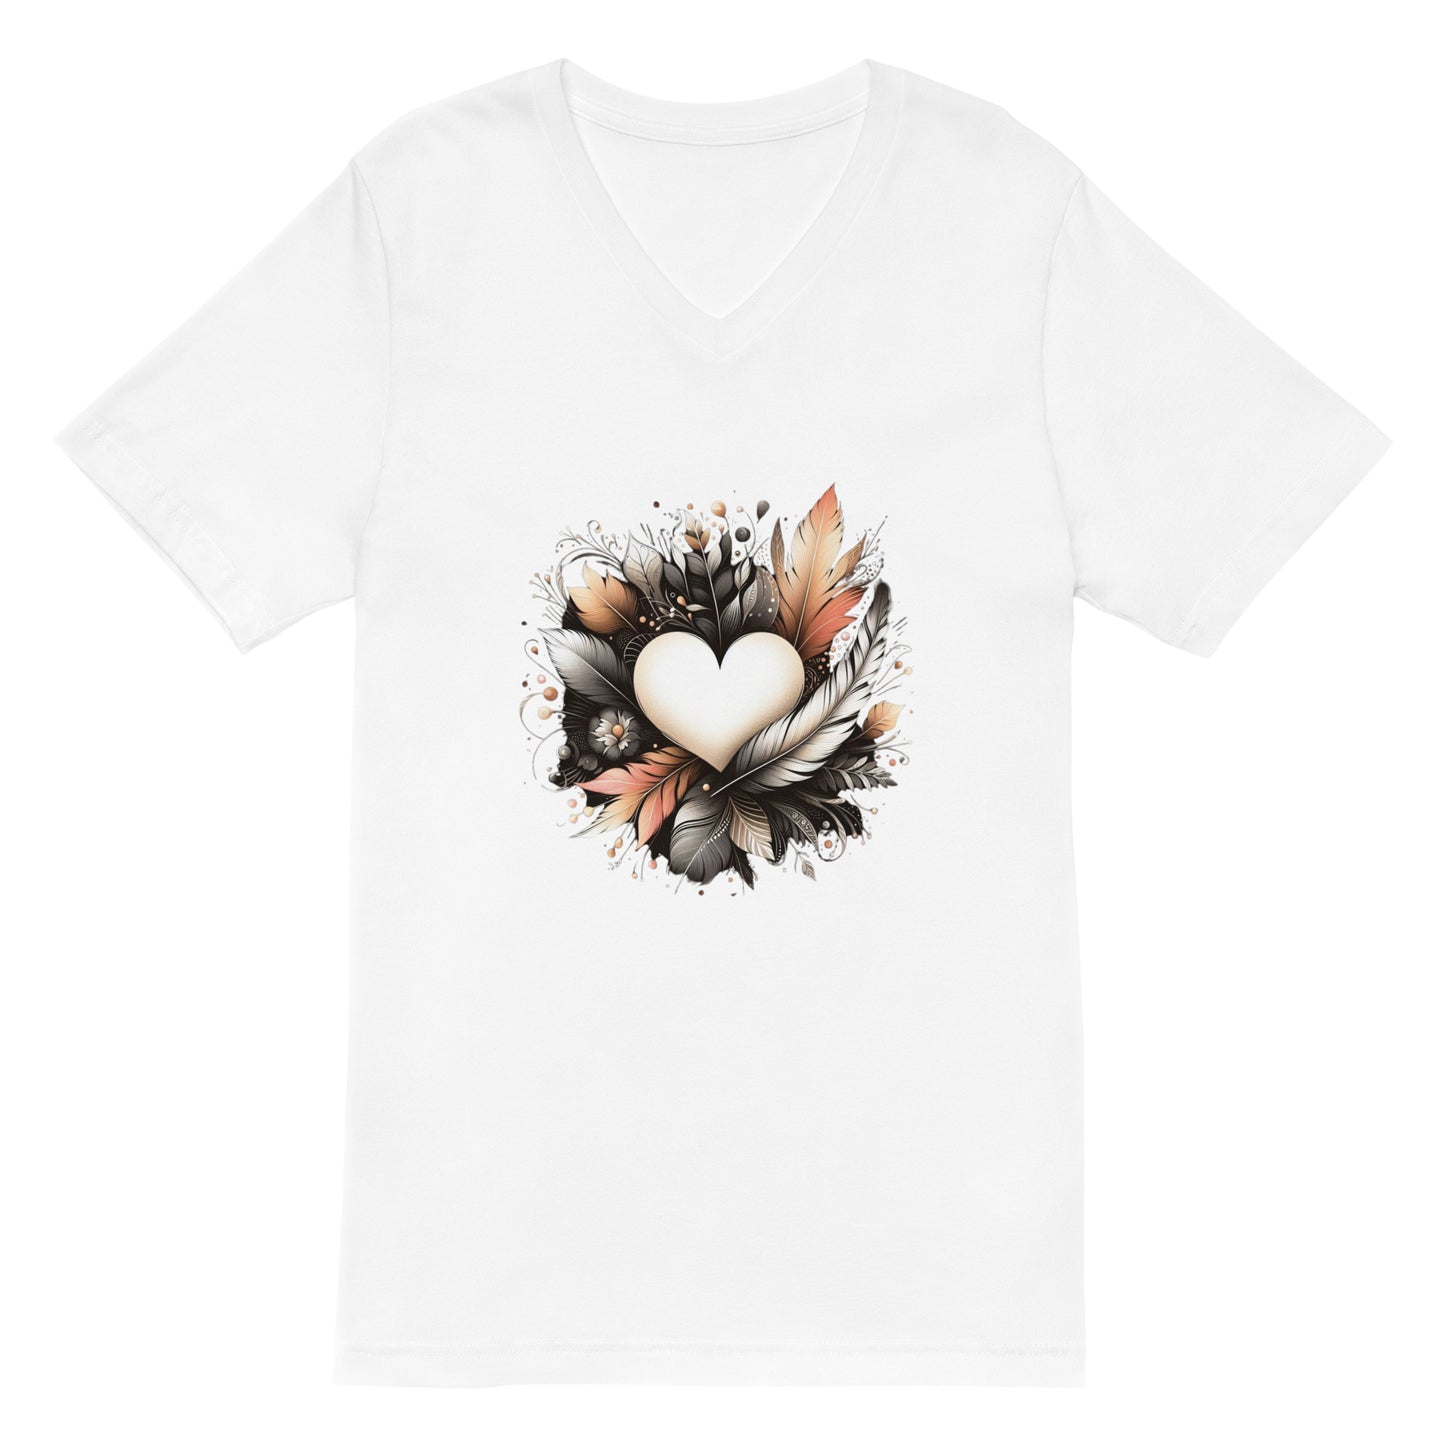 "MOM"S HEARTBEAT" Mother's Day Womans V-Neck T-Shirt